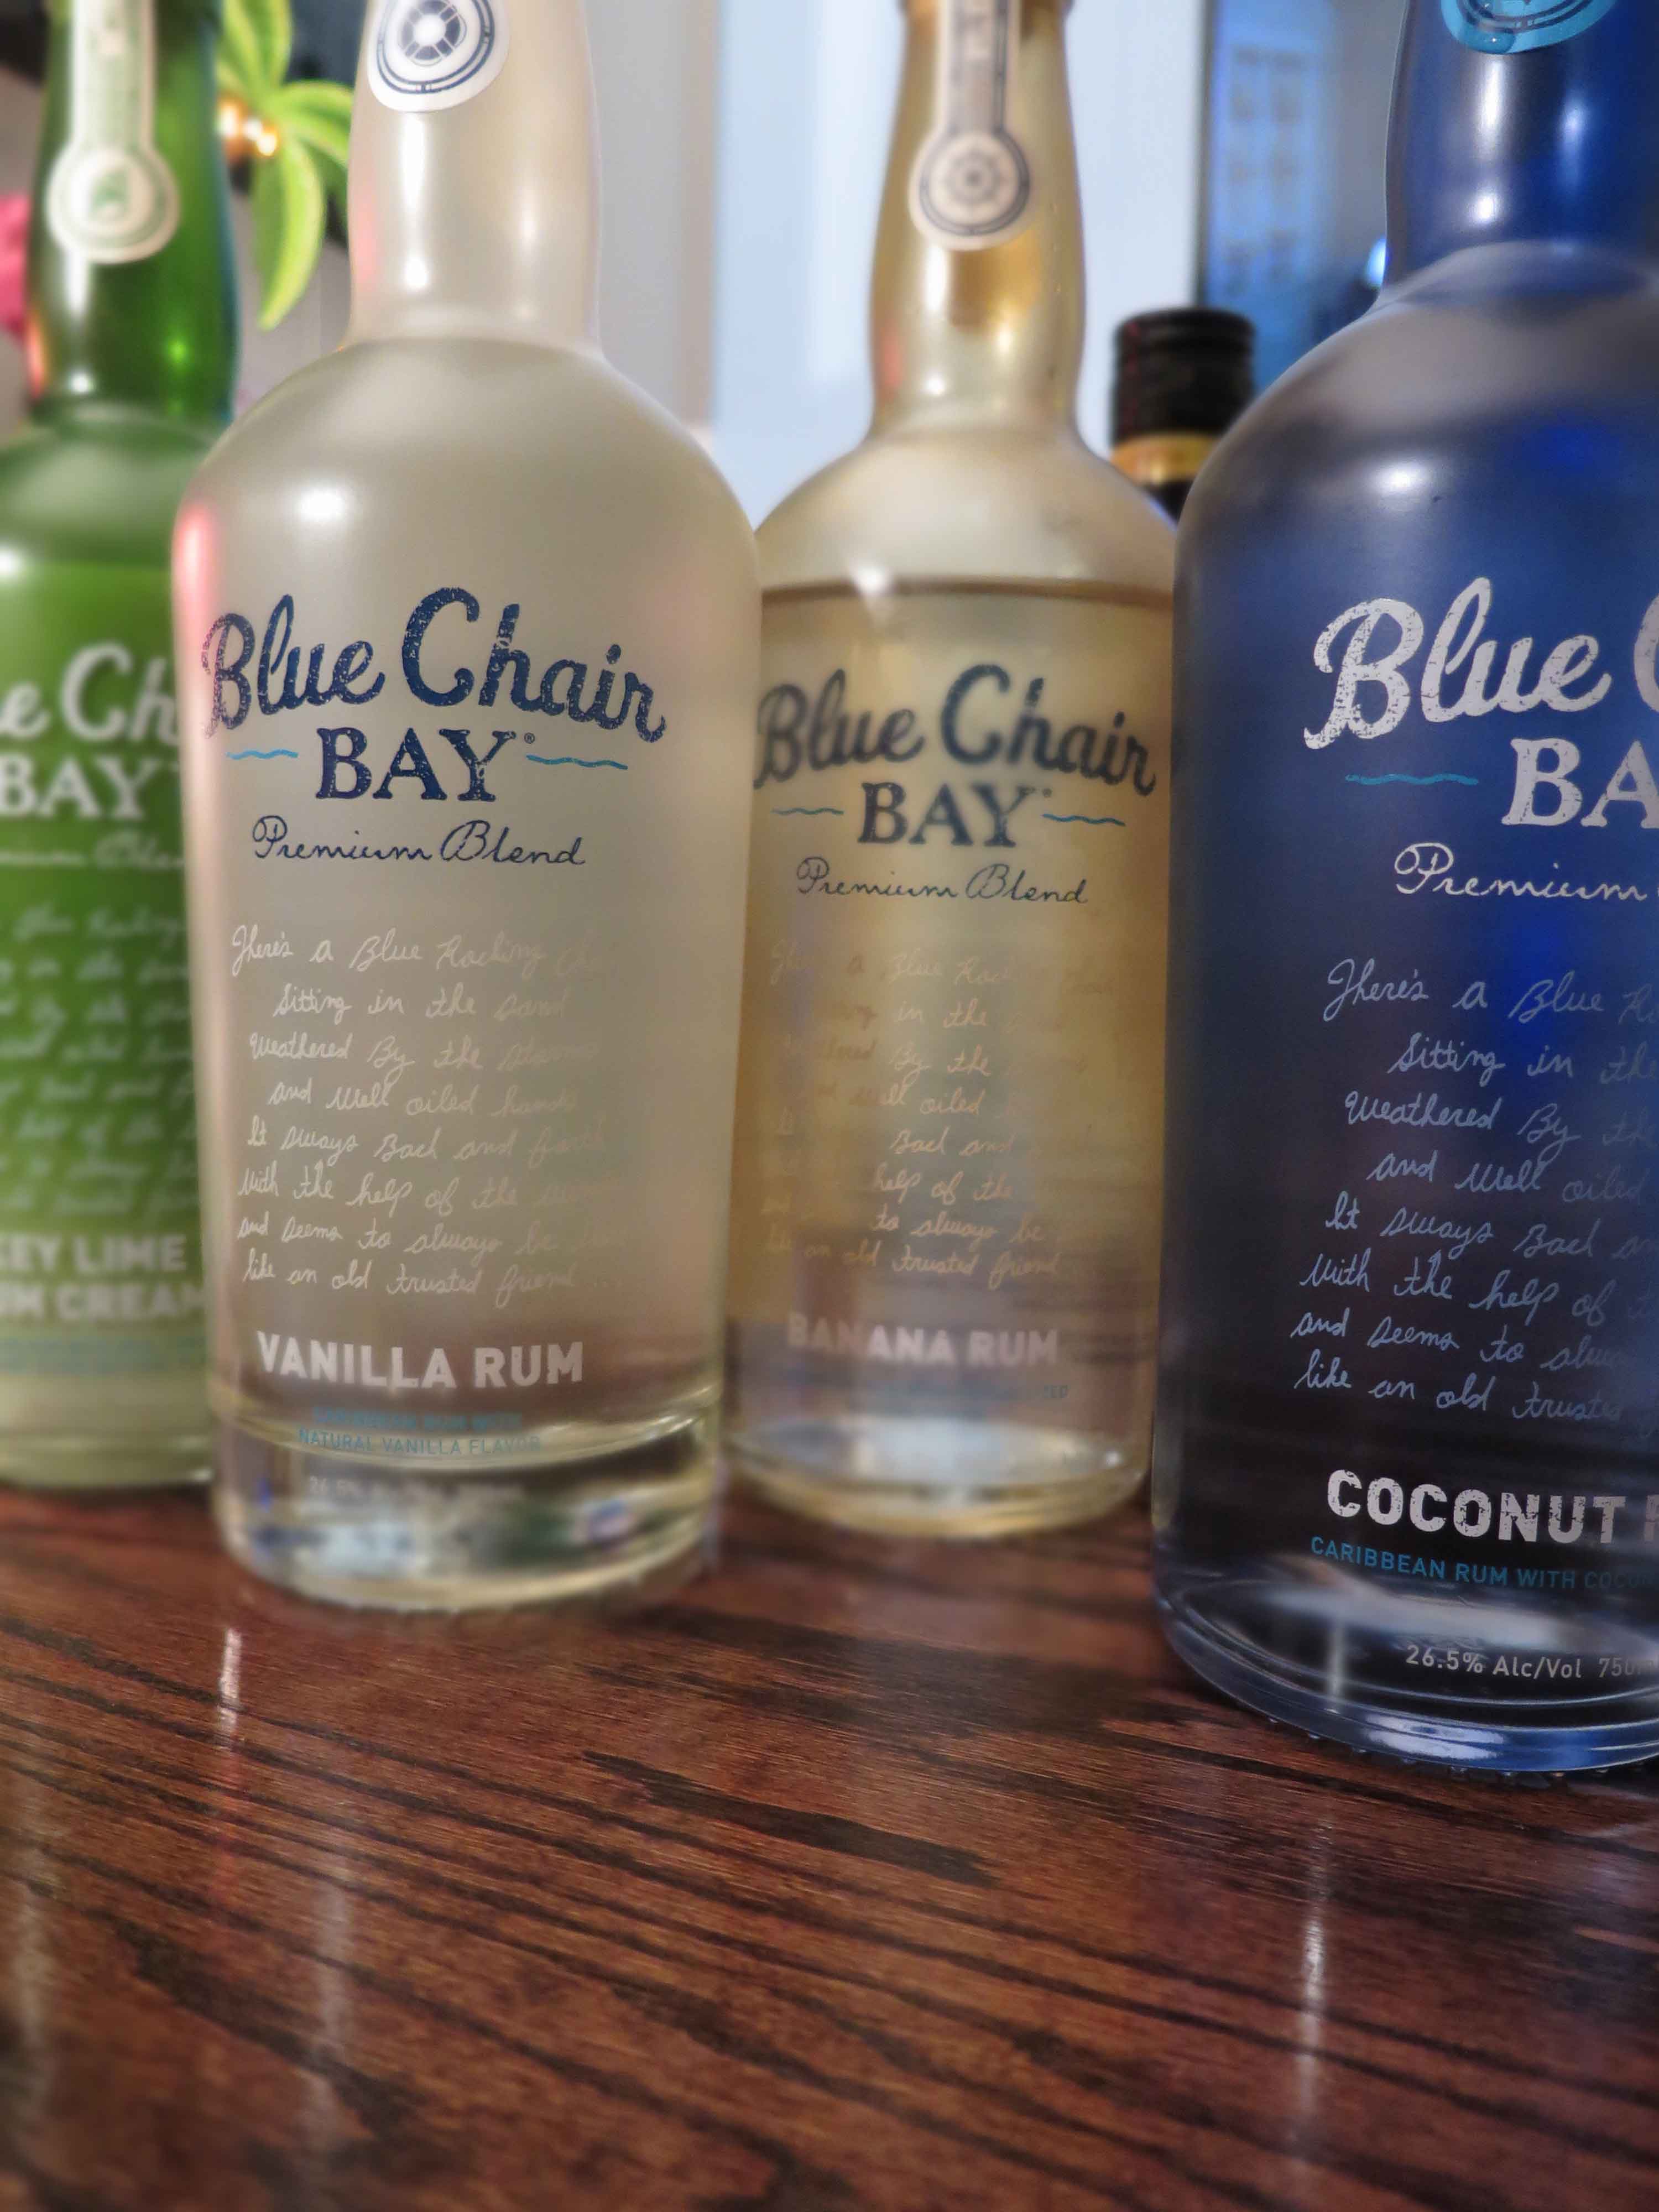 3 Great Ways to Drink Blue Chair Bay Rums